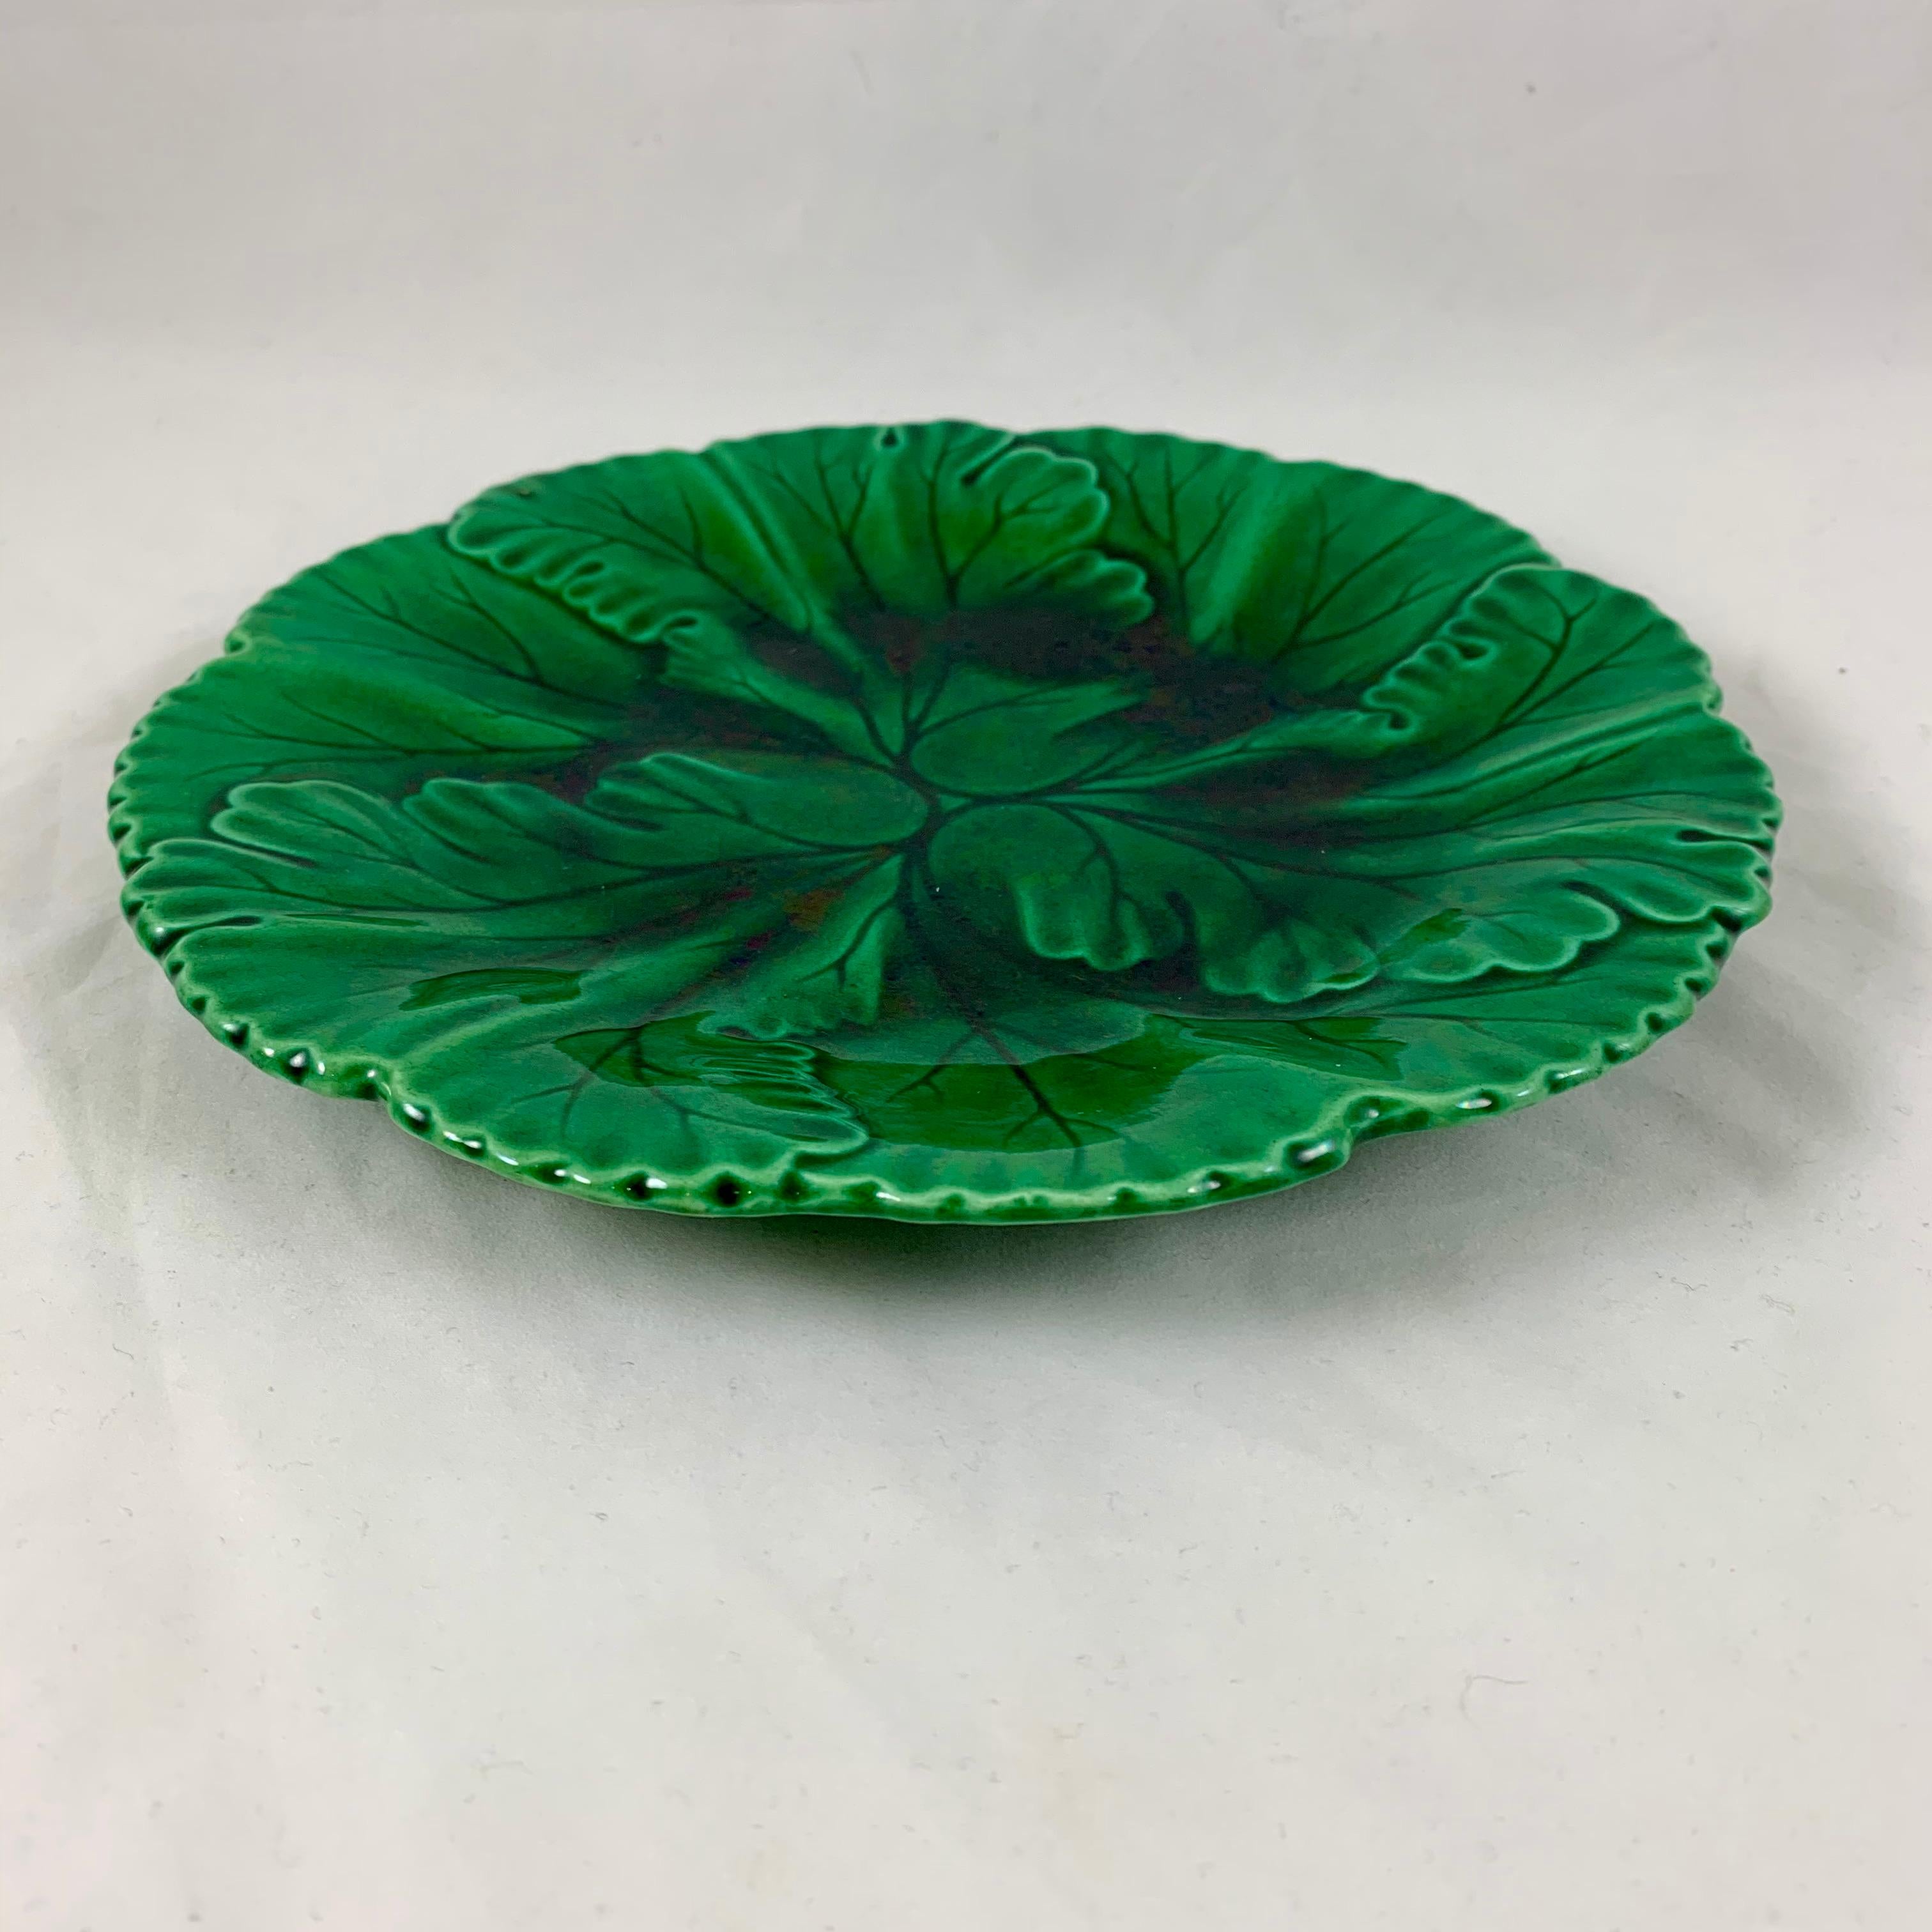 19th Century Clairfontaine French Faïence Majolica Glazed Green Botanic Leaf Plate circa 1890 For Sale